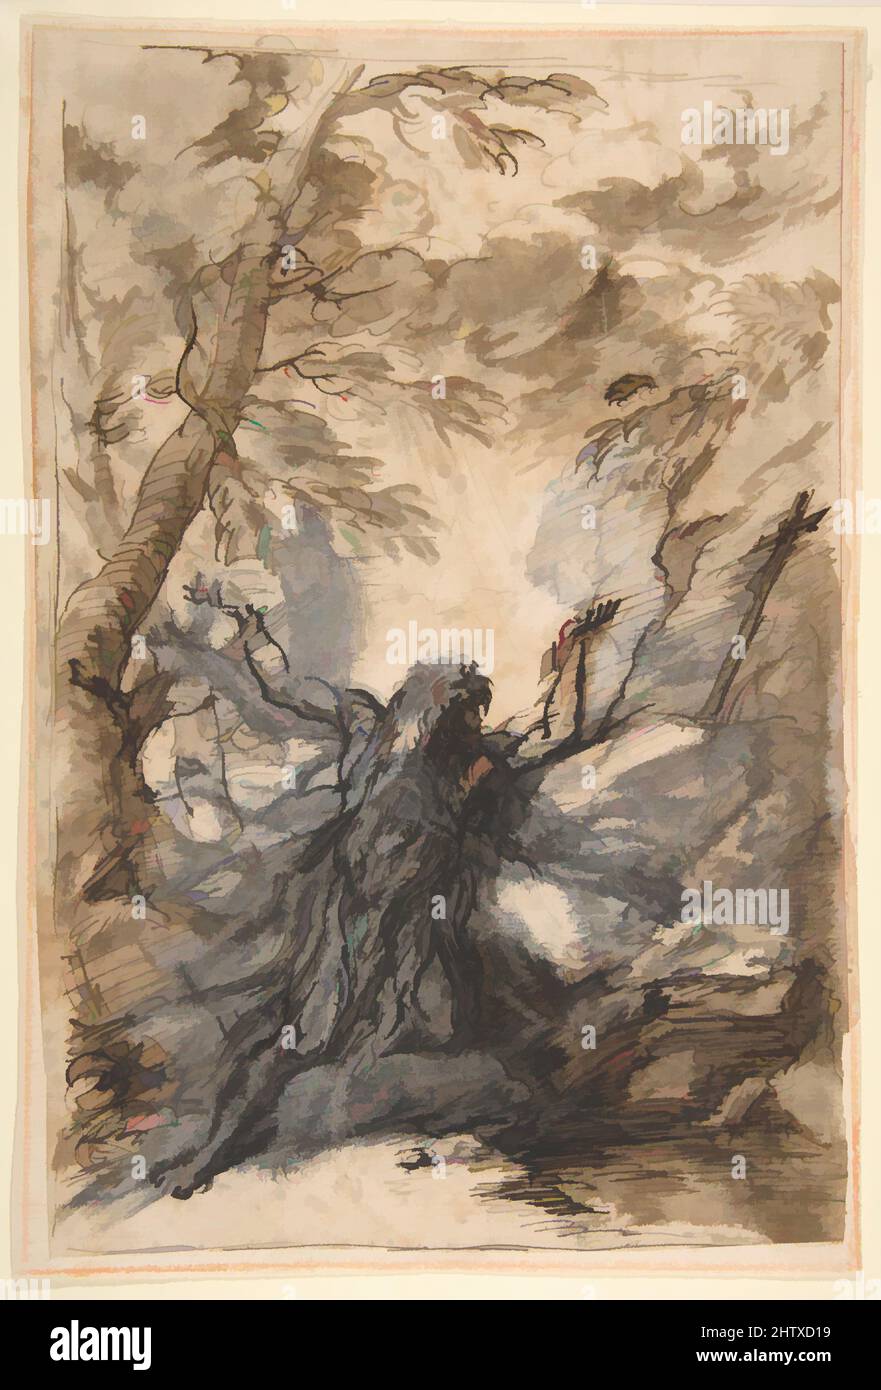 Art inspired by St. Paul, Hermit, 1615–73, Pen and brown and black ink, brown wash, over black chalk, corrected and highlighted with gray gouache, 11-1/2 x 7-5/8 in. (29.2 x 19.4 cm), Drawings, Salvator Rosa (Italian, Arenella (Naples) 1615–1673 Rome, Classic works modernized by Artotop with a splash of modernity. Shapes, color and value, eye-catching visual impact on art. Emotions through freedom of artworks in a contemporary way. A timeless message pursuing a wildly creative new direction. Artists turning to the digital medium and creating the Artotop NFT Stock Photo